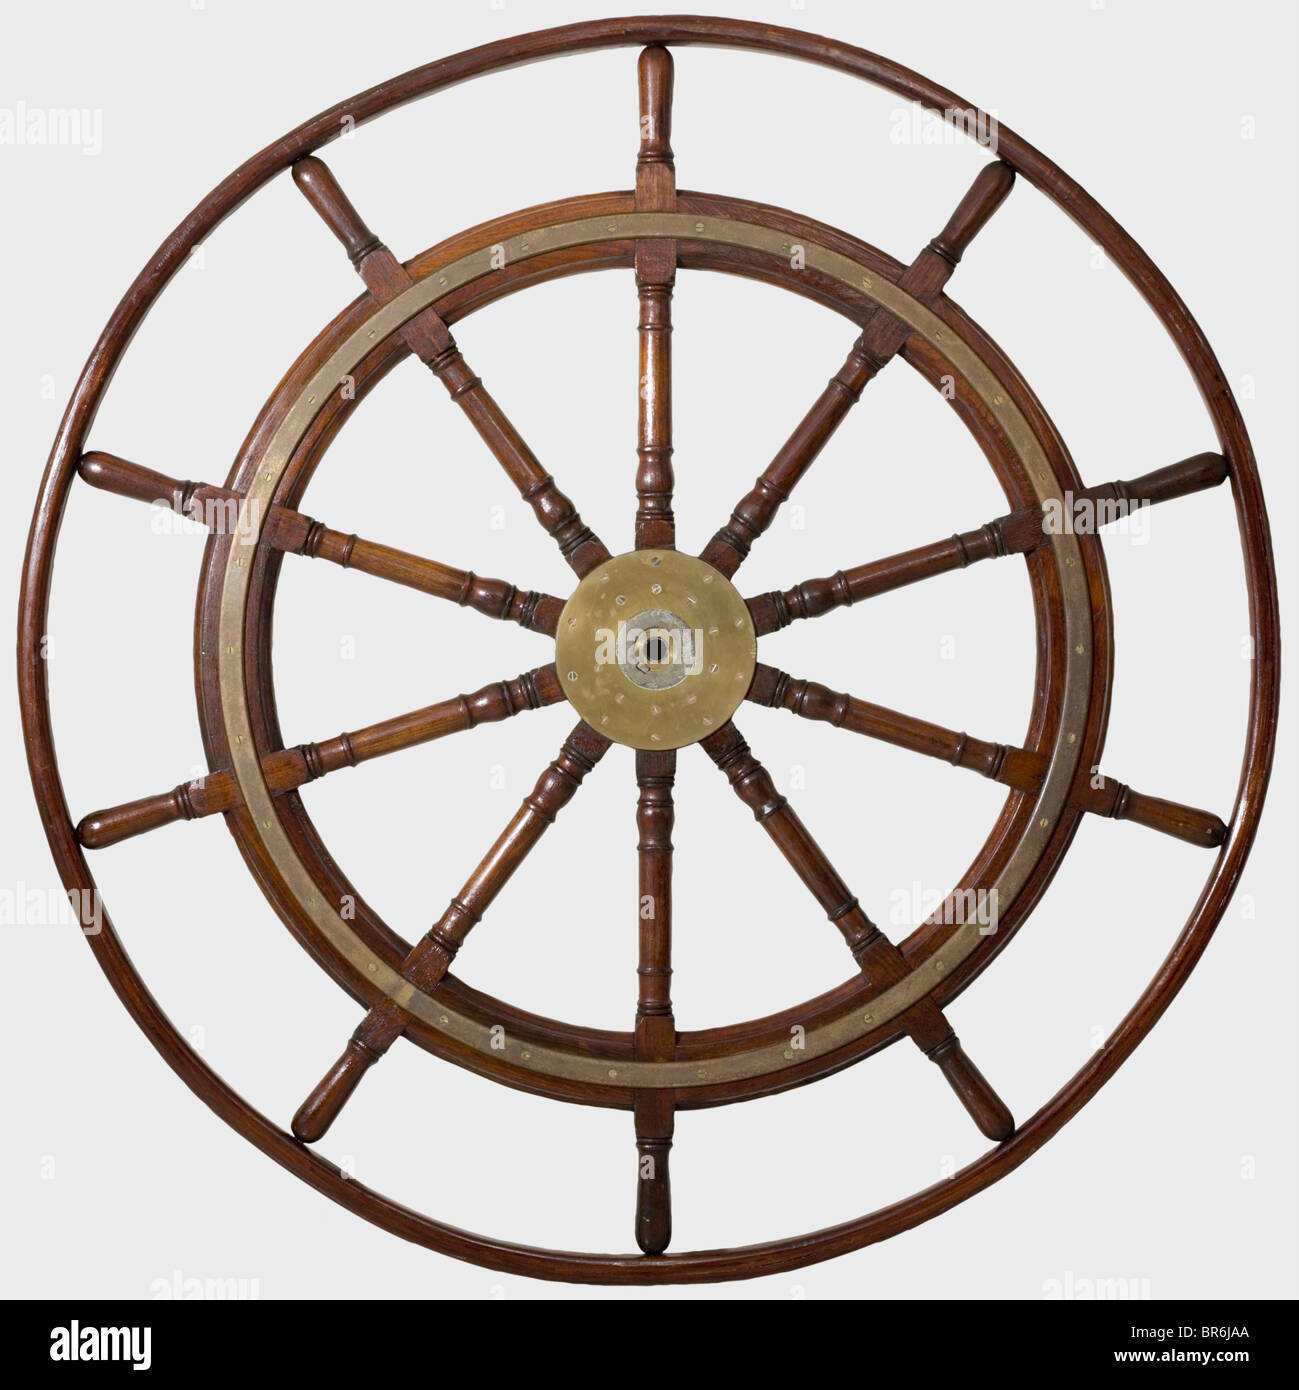 A large ship's wheel, from a tall ship, mid 19th century. Oak wood with iron fittings. Ship's wheel with ten spokes, the spoke-handles surrounded by a wooden ring. Diameter 190 cm. historic, historical, 19th century, fine arts, art, art object, art objects, artful, precious, collectible, collector's item, collectibles, collector's items, rarity, rarities, Stock Photo